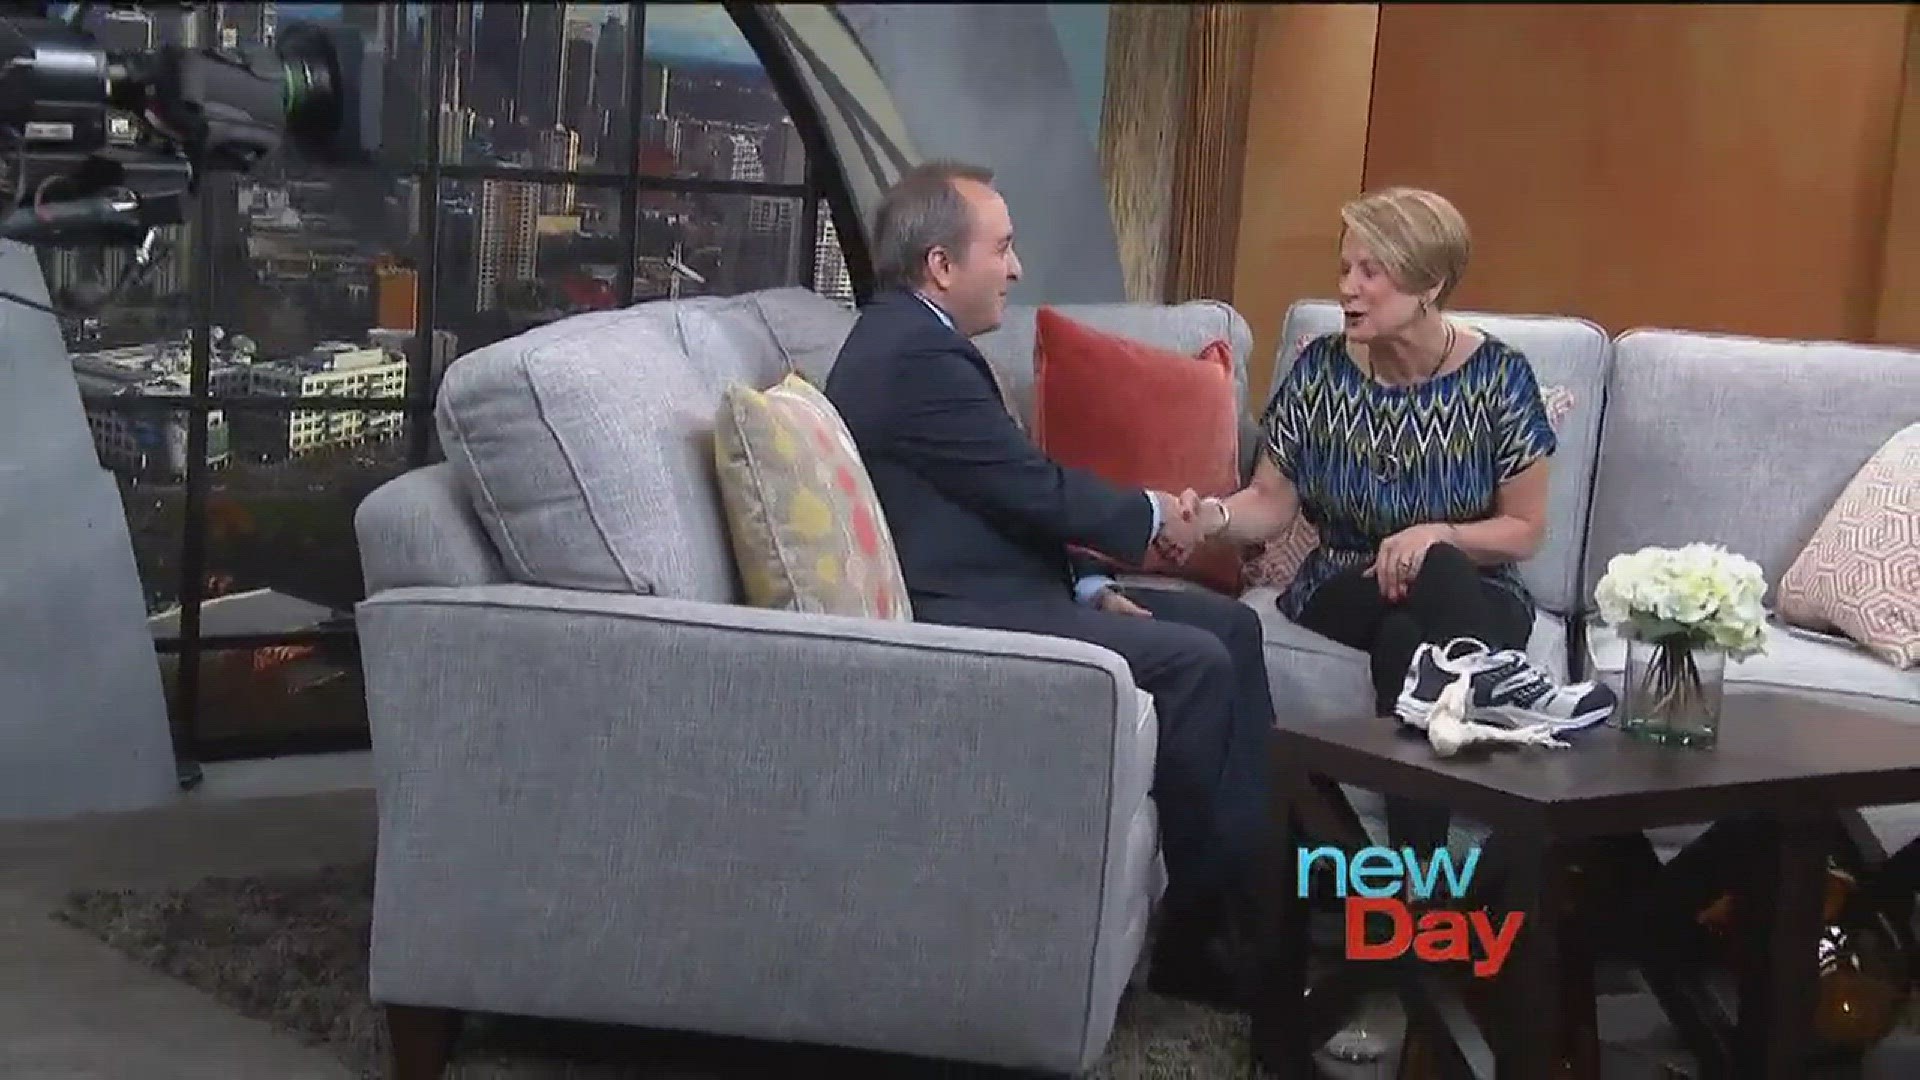 Dr. Peter Lallas explained how to avoid common walking mistakes and care for your feet.